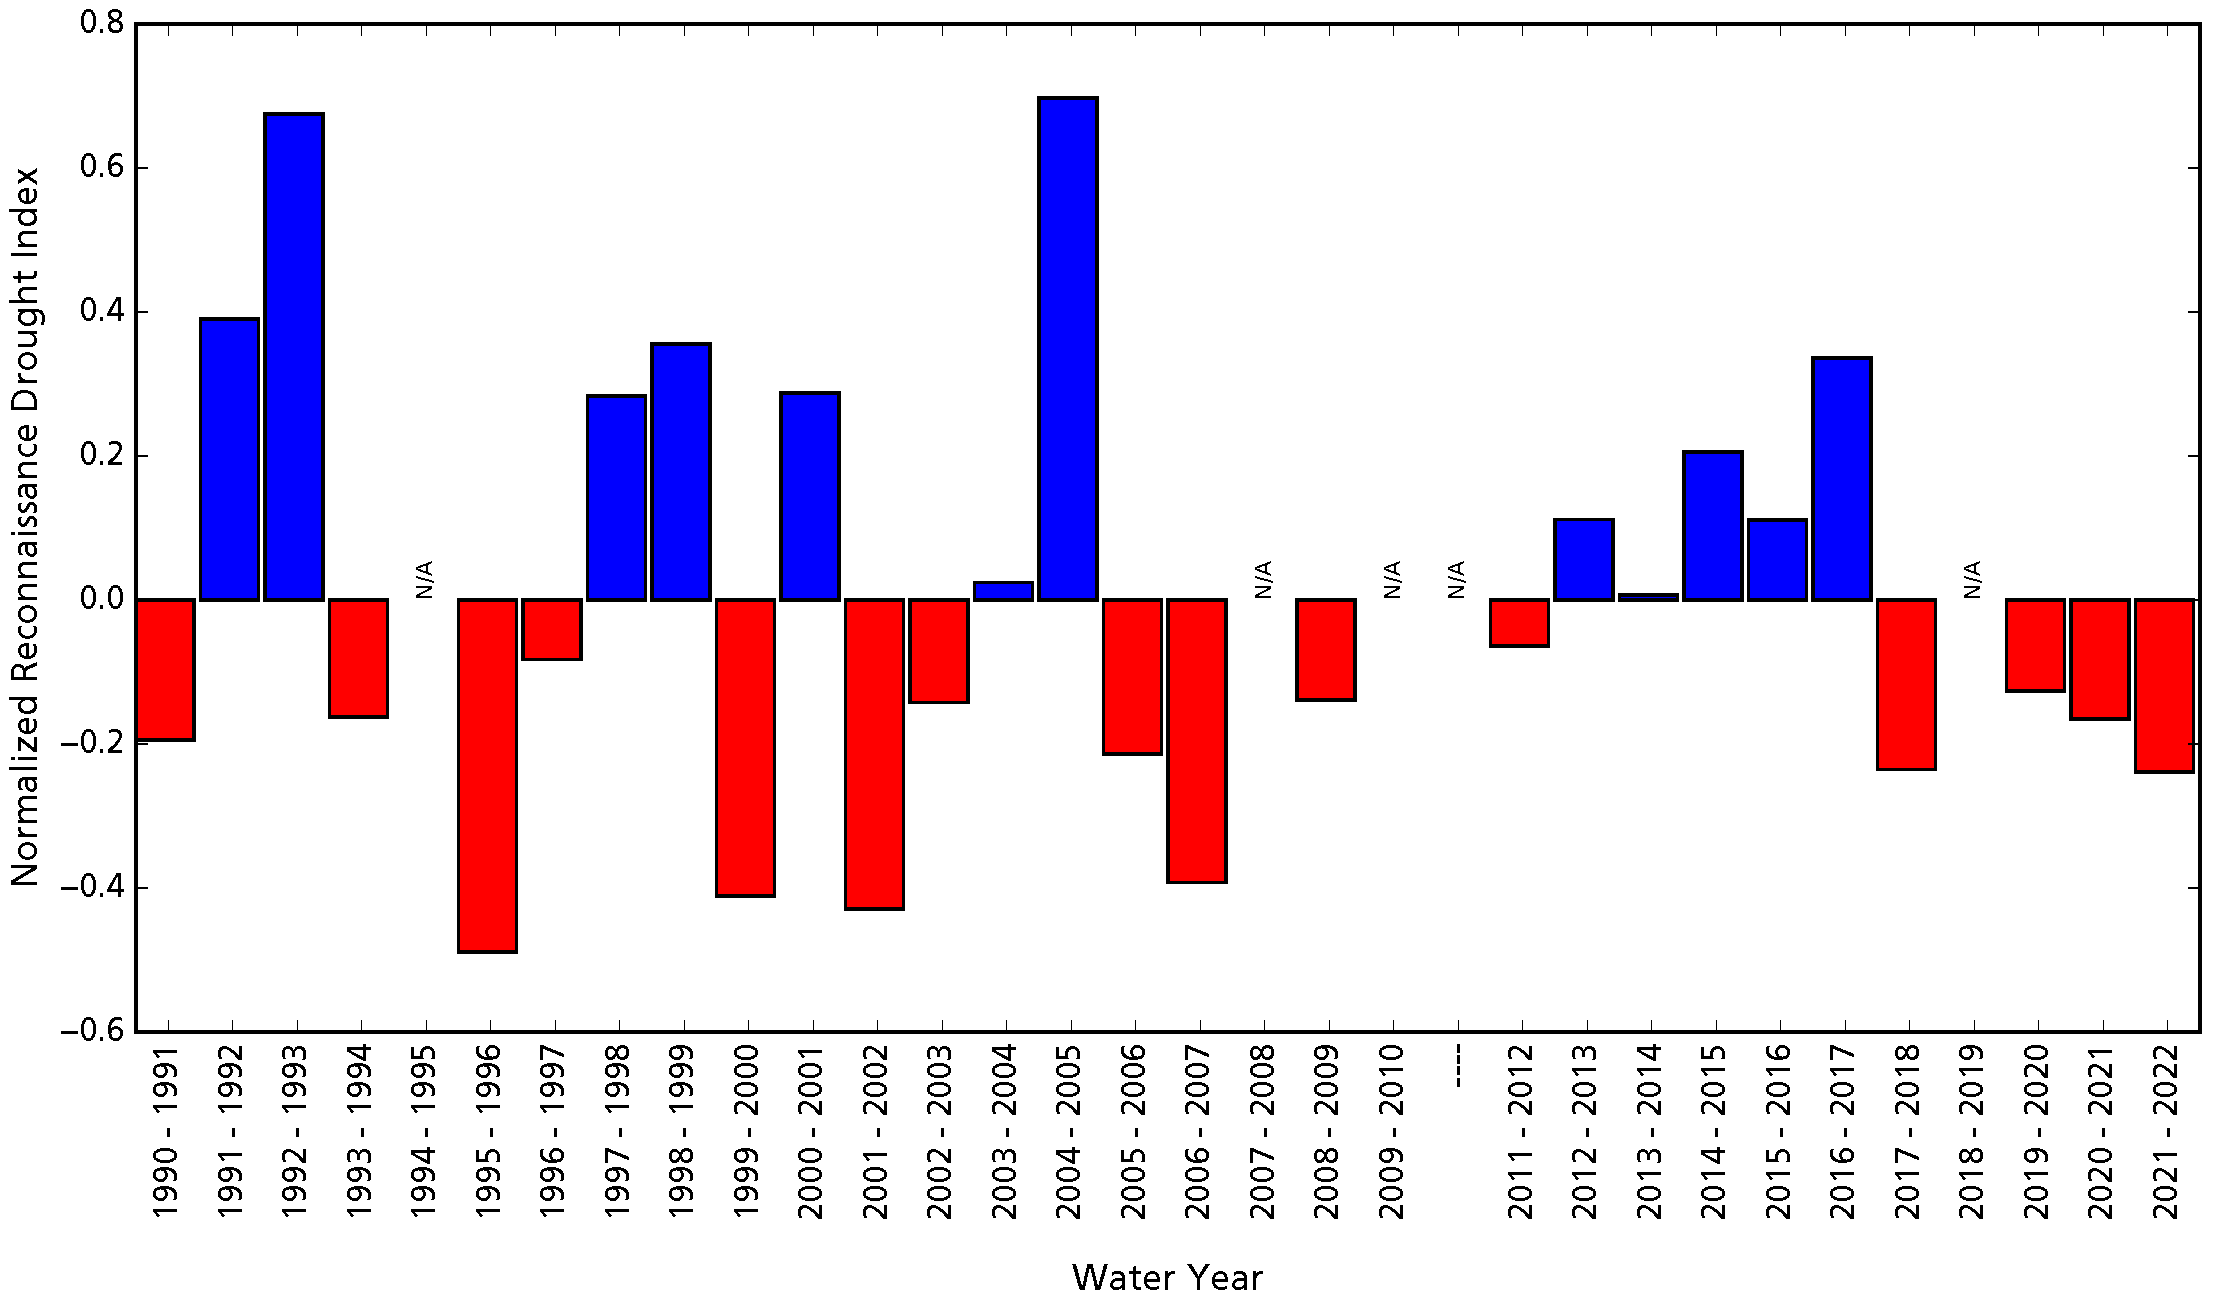 Bar graph showing data for the Reconnaissance drought index for all but five water years since 1991.